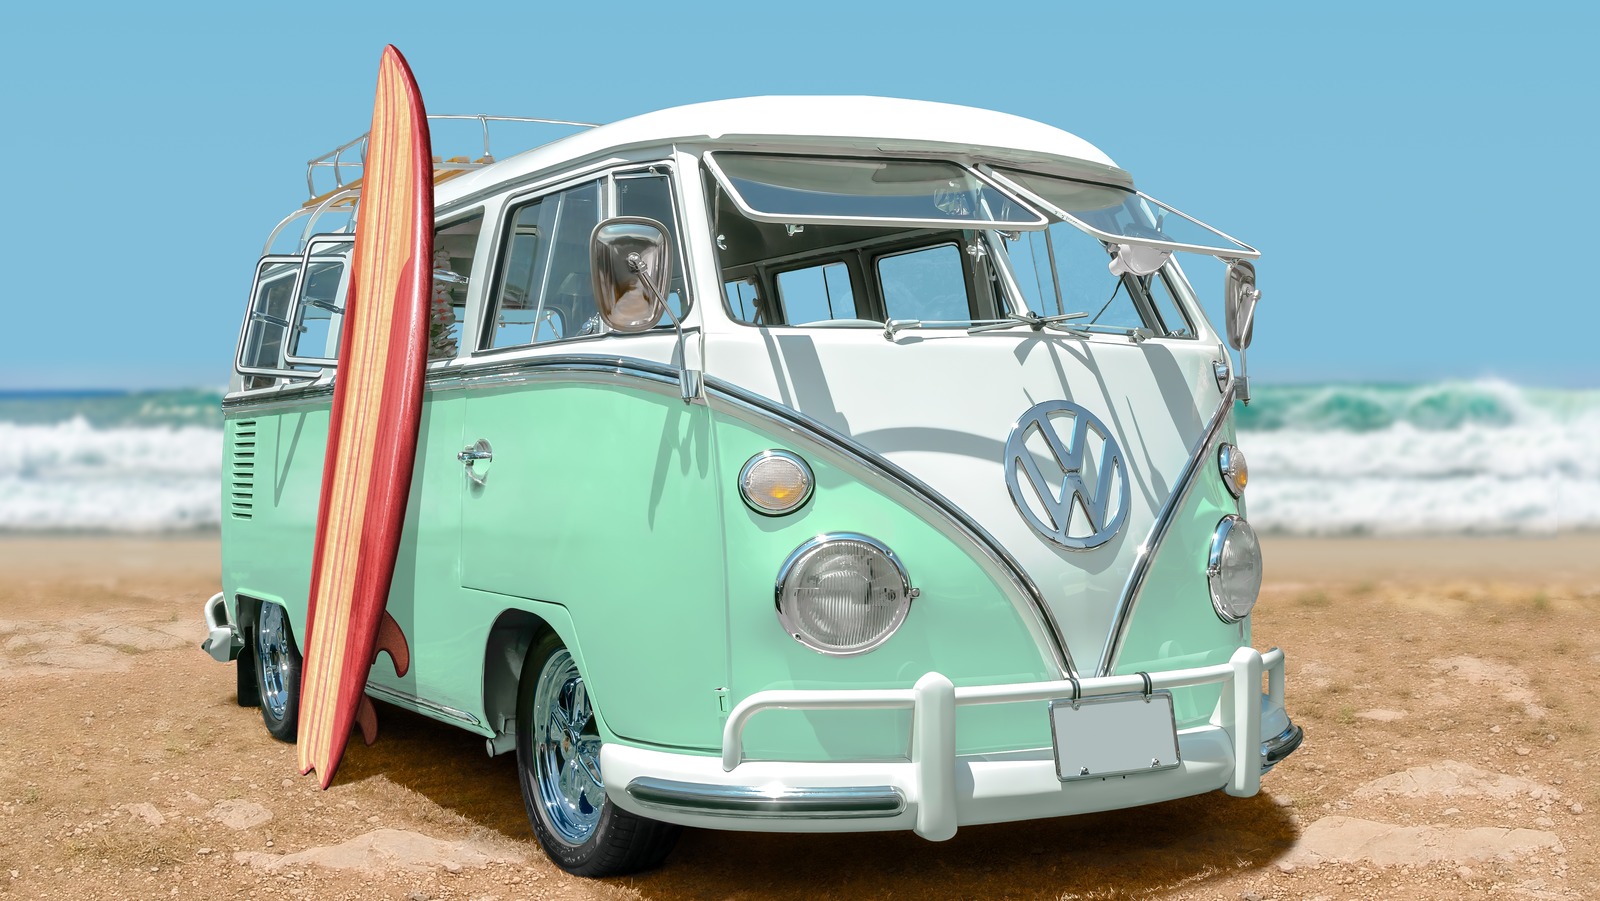 https://www.slashgear.com/img/gallery/these-retro-rv-campers-look-just-like-a-classic-vw-bus/l-intro-1683470512.jpg